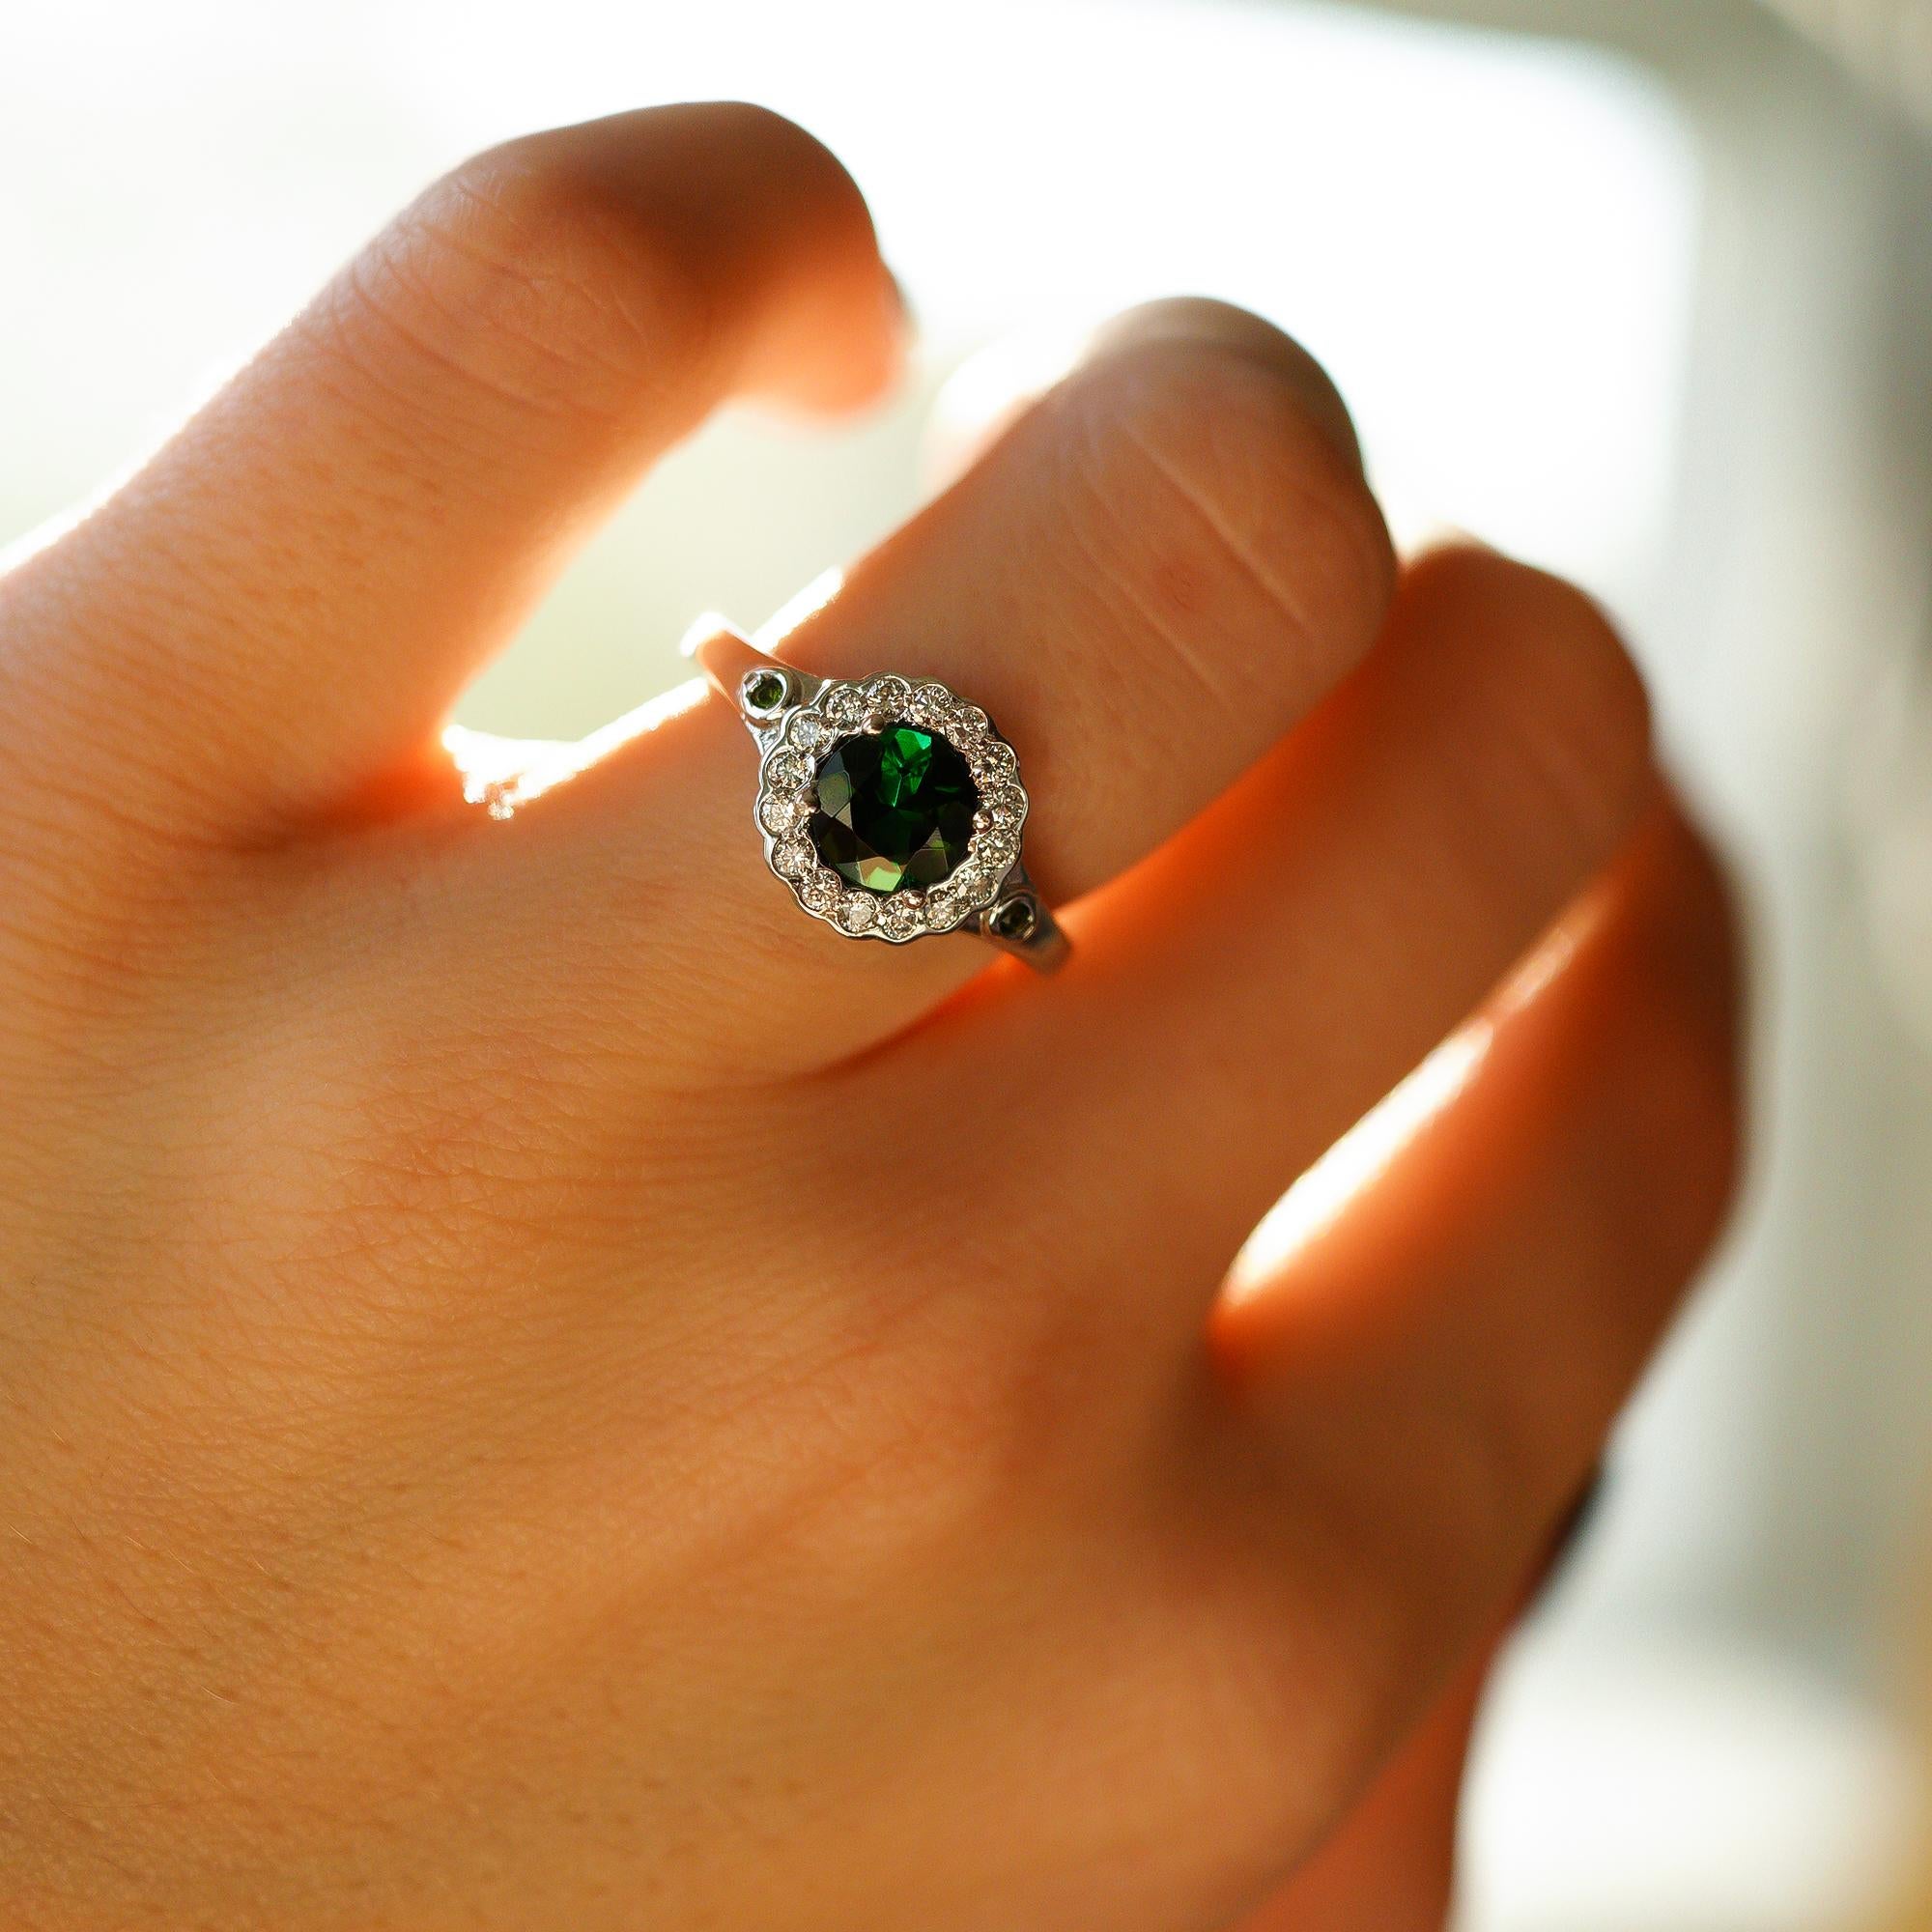 For Sale:  10k White Gold 1ct Natural Green Tourmaline & Diamond '.28t.c.w' Halo Ring 6